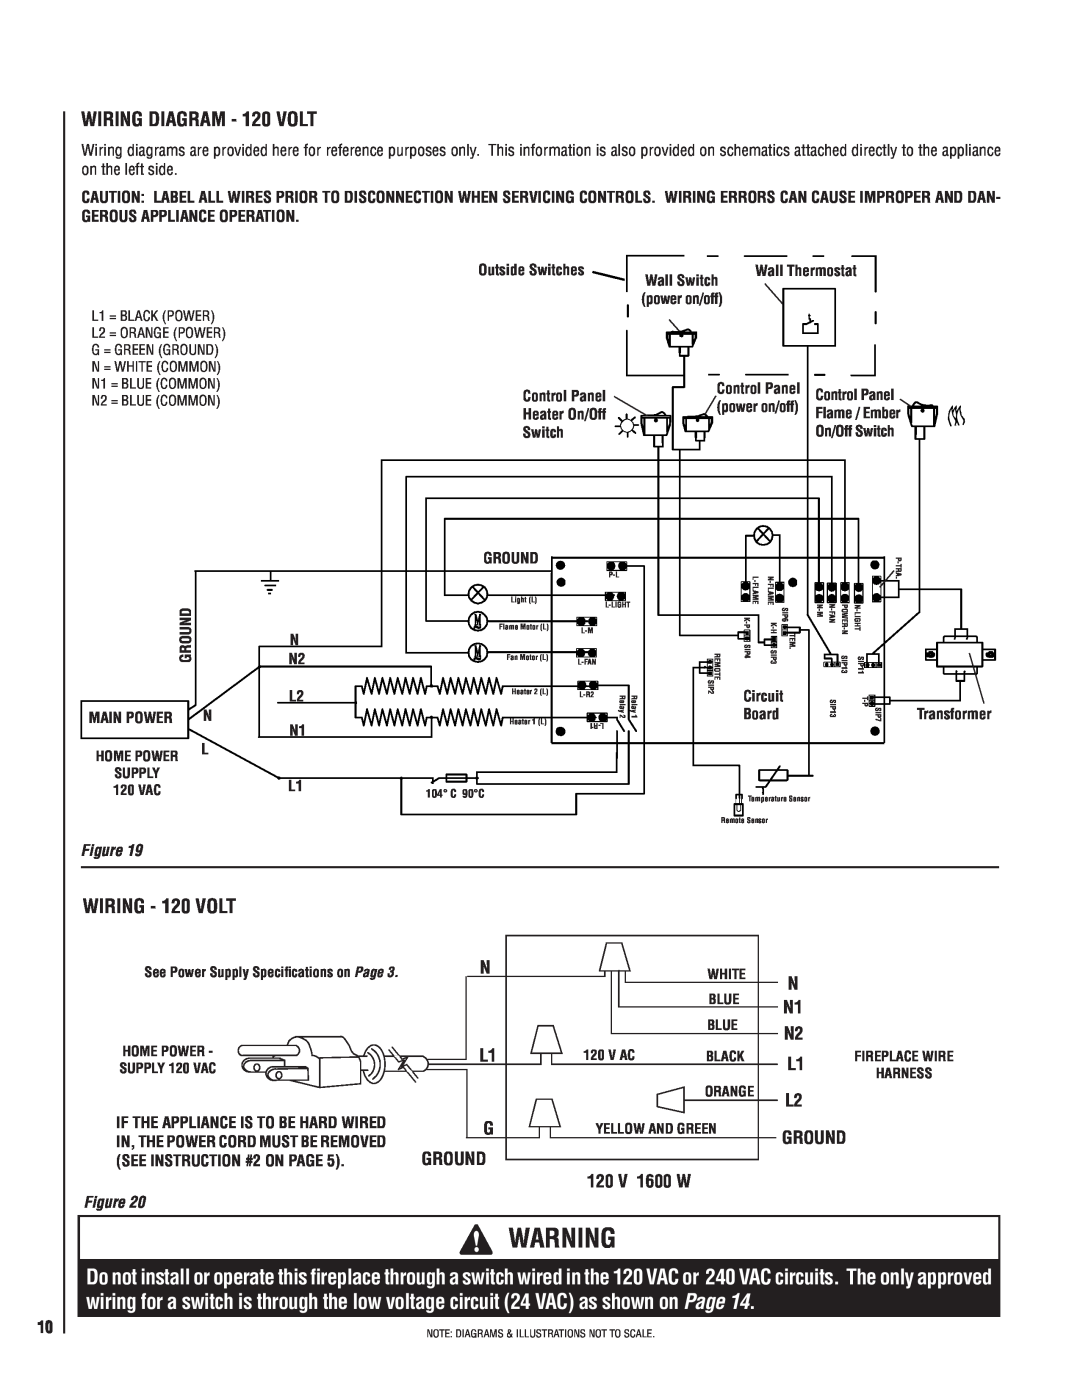 Maytag MPE-33R WIRING DIAGRAM - 120 VOLT, WIRING - 120 VOLT, GROUND 120 V 1600 W, Outside Switches, Wall Switch, Ground 